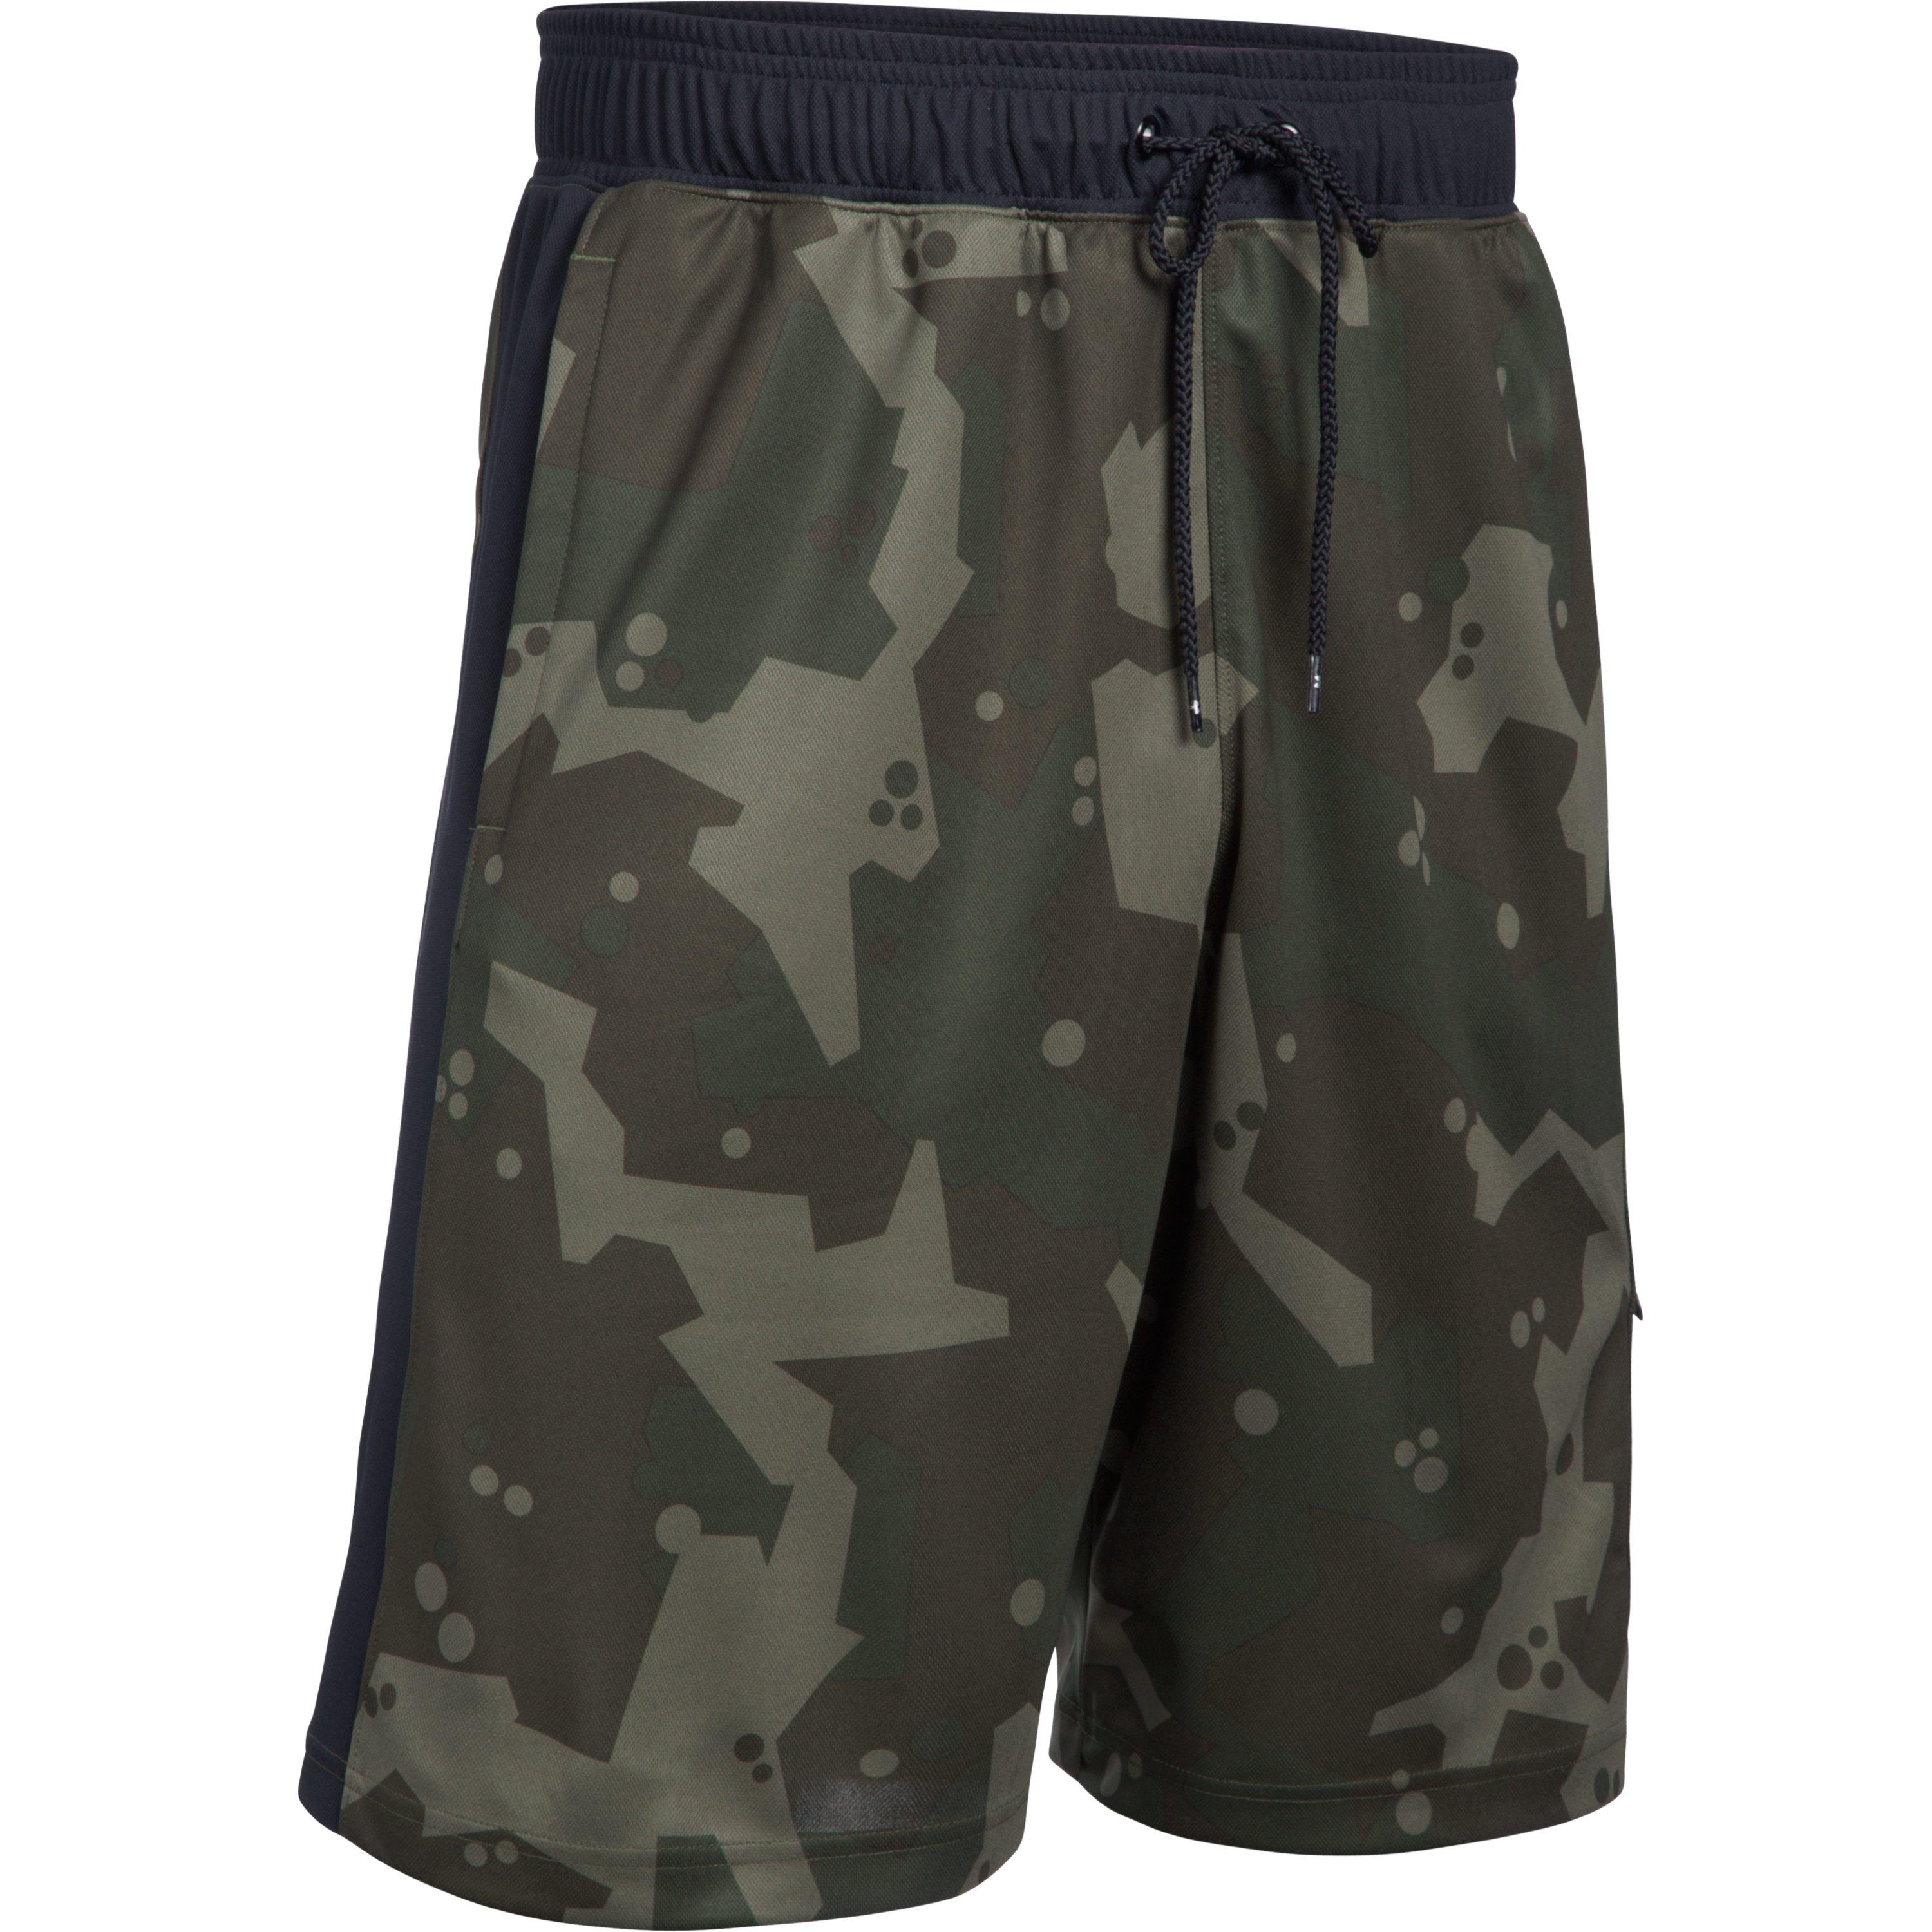 Lyst - Under Armour Men's Ua Courtside Cargo Shorts in Green for Men